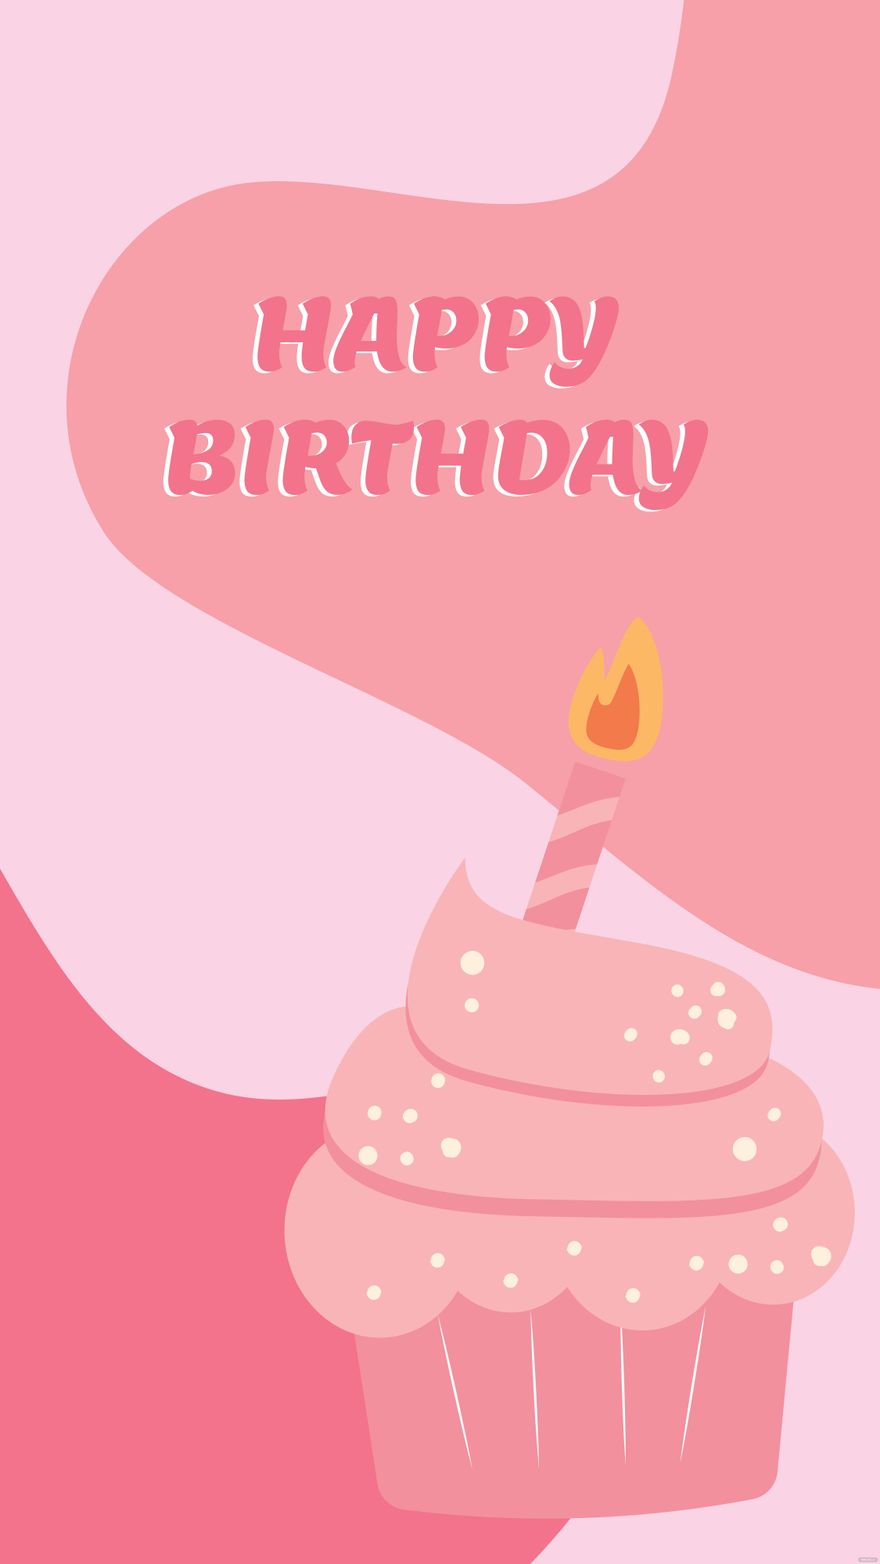 Birthday Mobile Background - Images, HD, Free, Download 